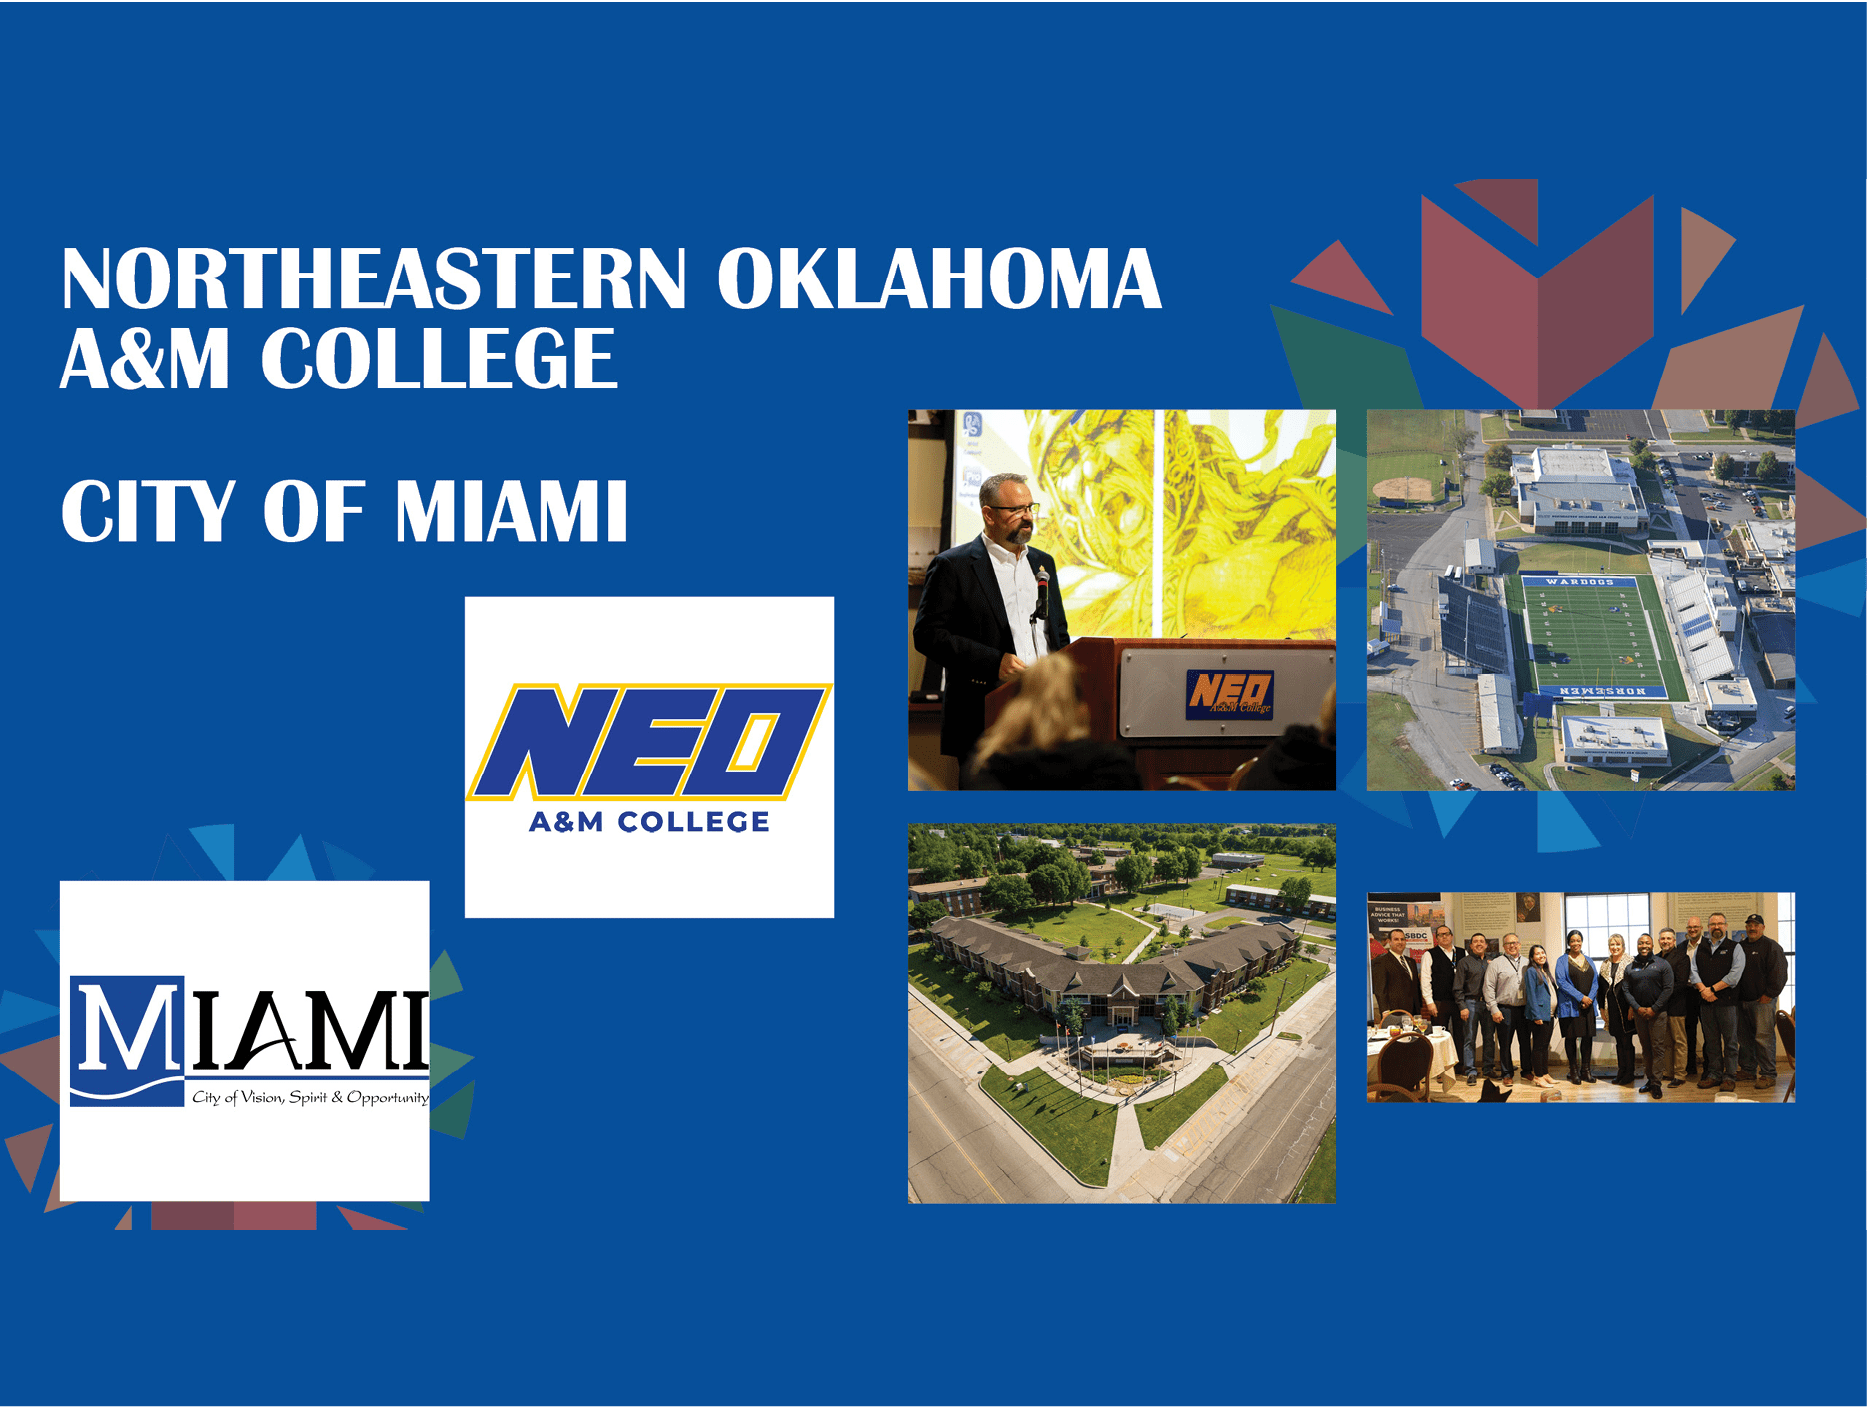 Northeastern Oklahoma A&M College and the City of Miami